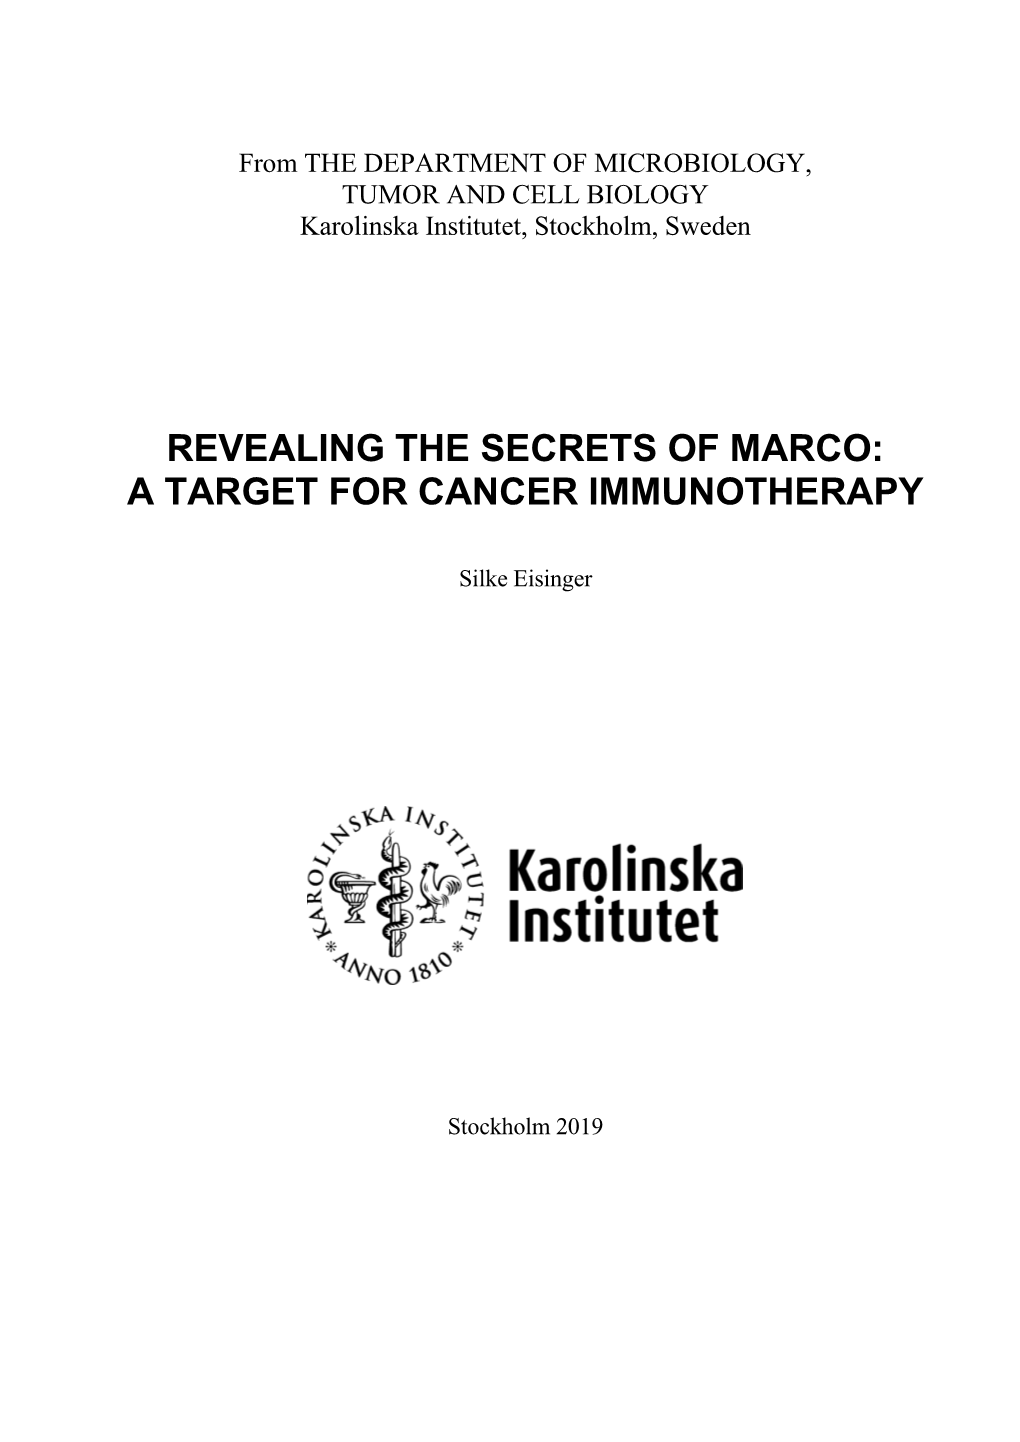 Revealing the Secrets of Marco: a Target for Cancer Immunotherapy